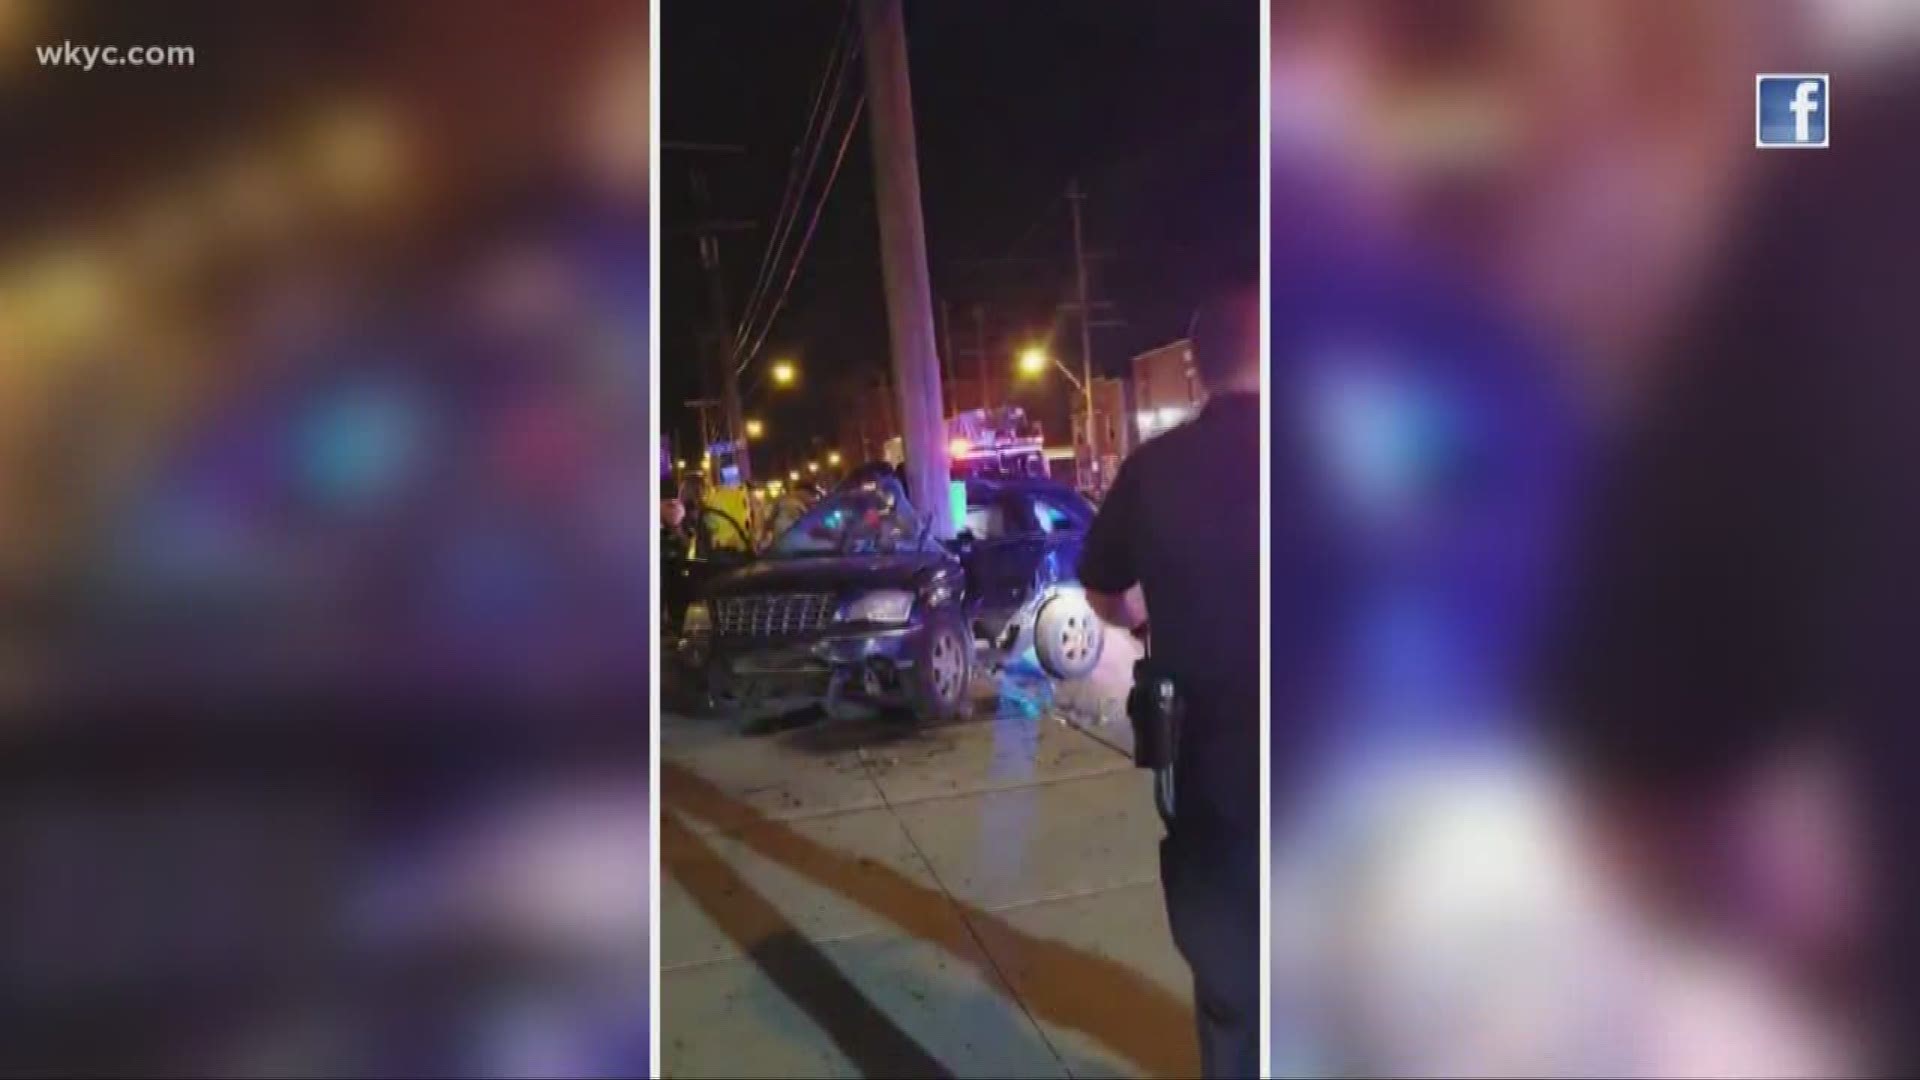 A second person has died after a police chase ending in a crash